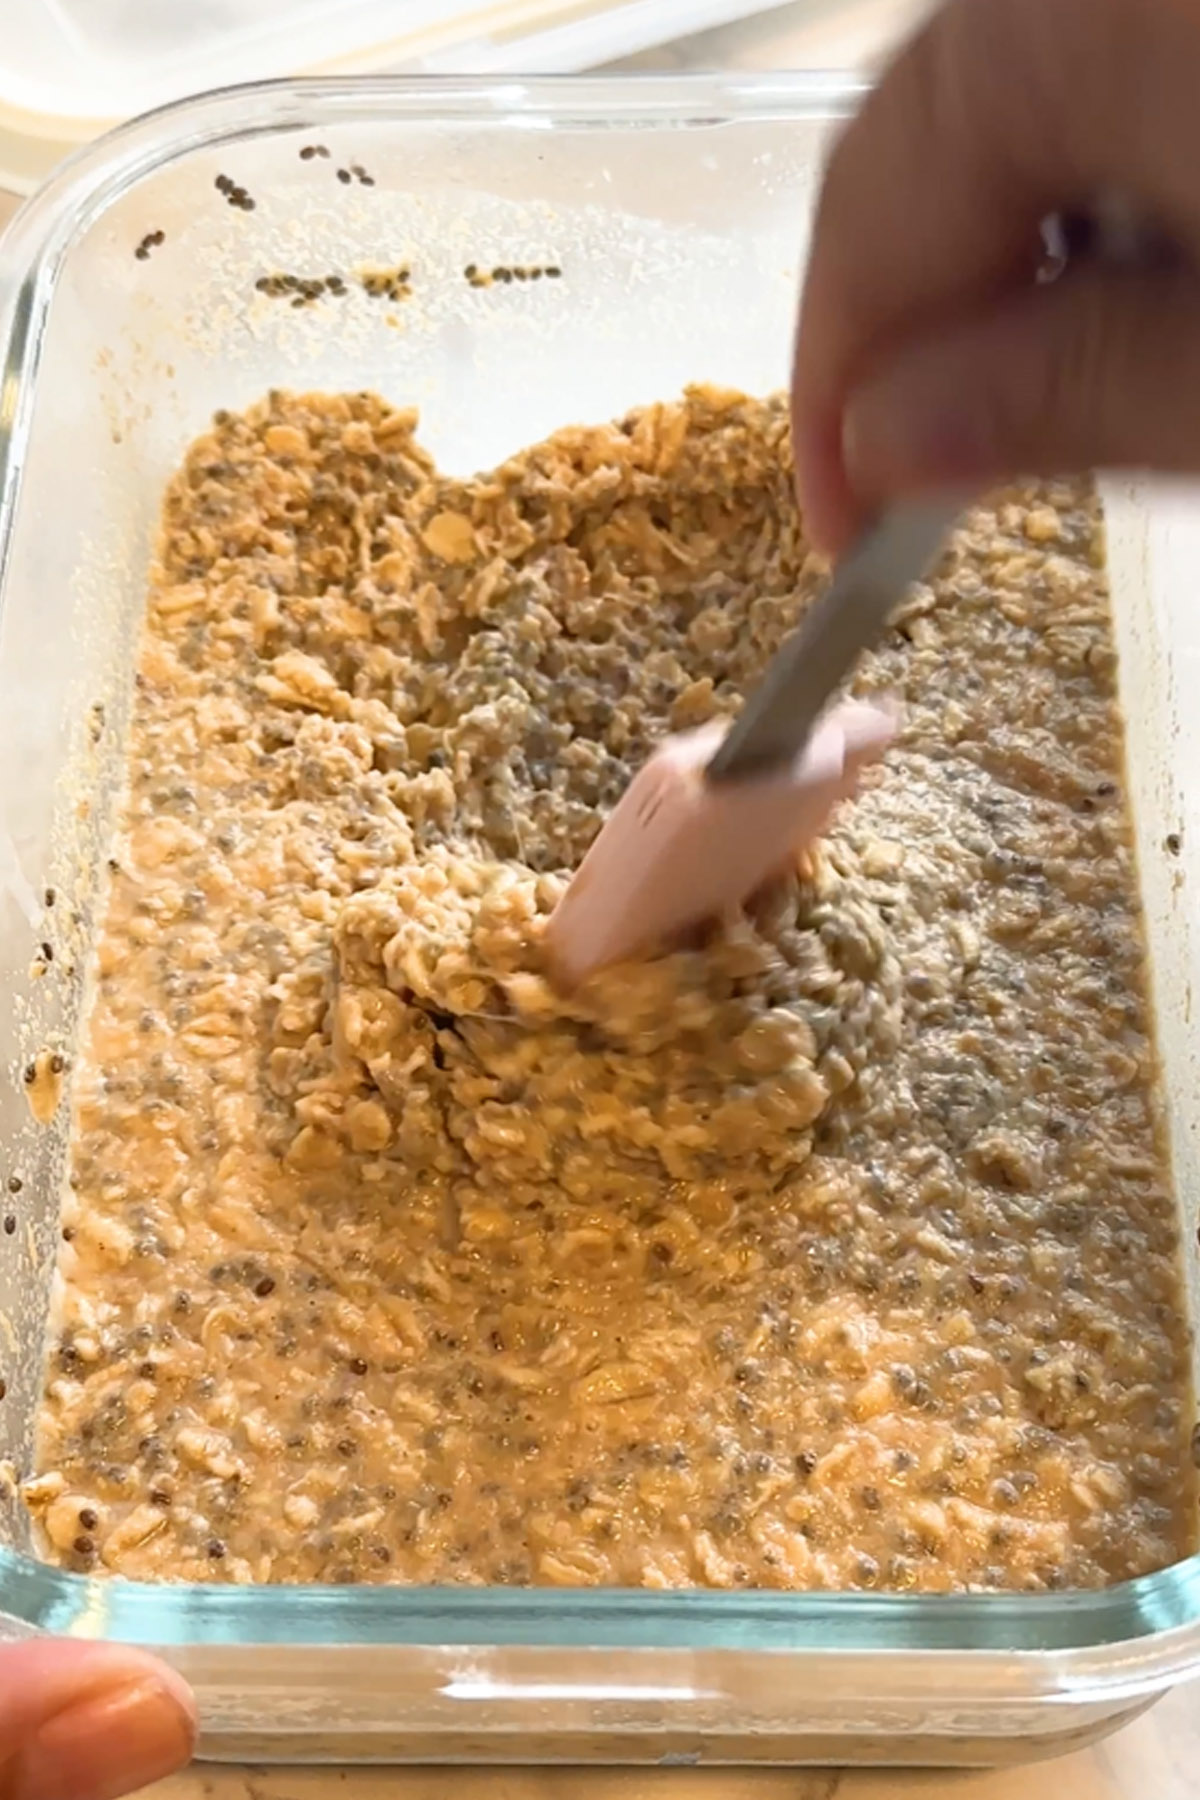 Thick, soaked oats are stirred with a small pink spatula.